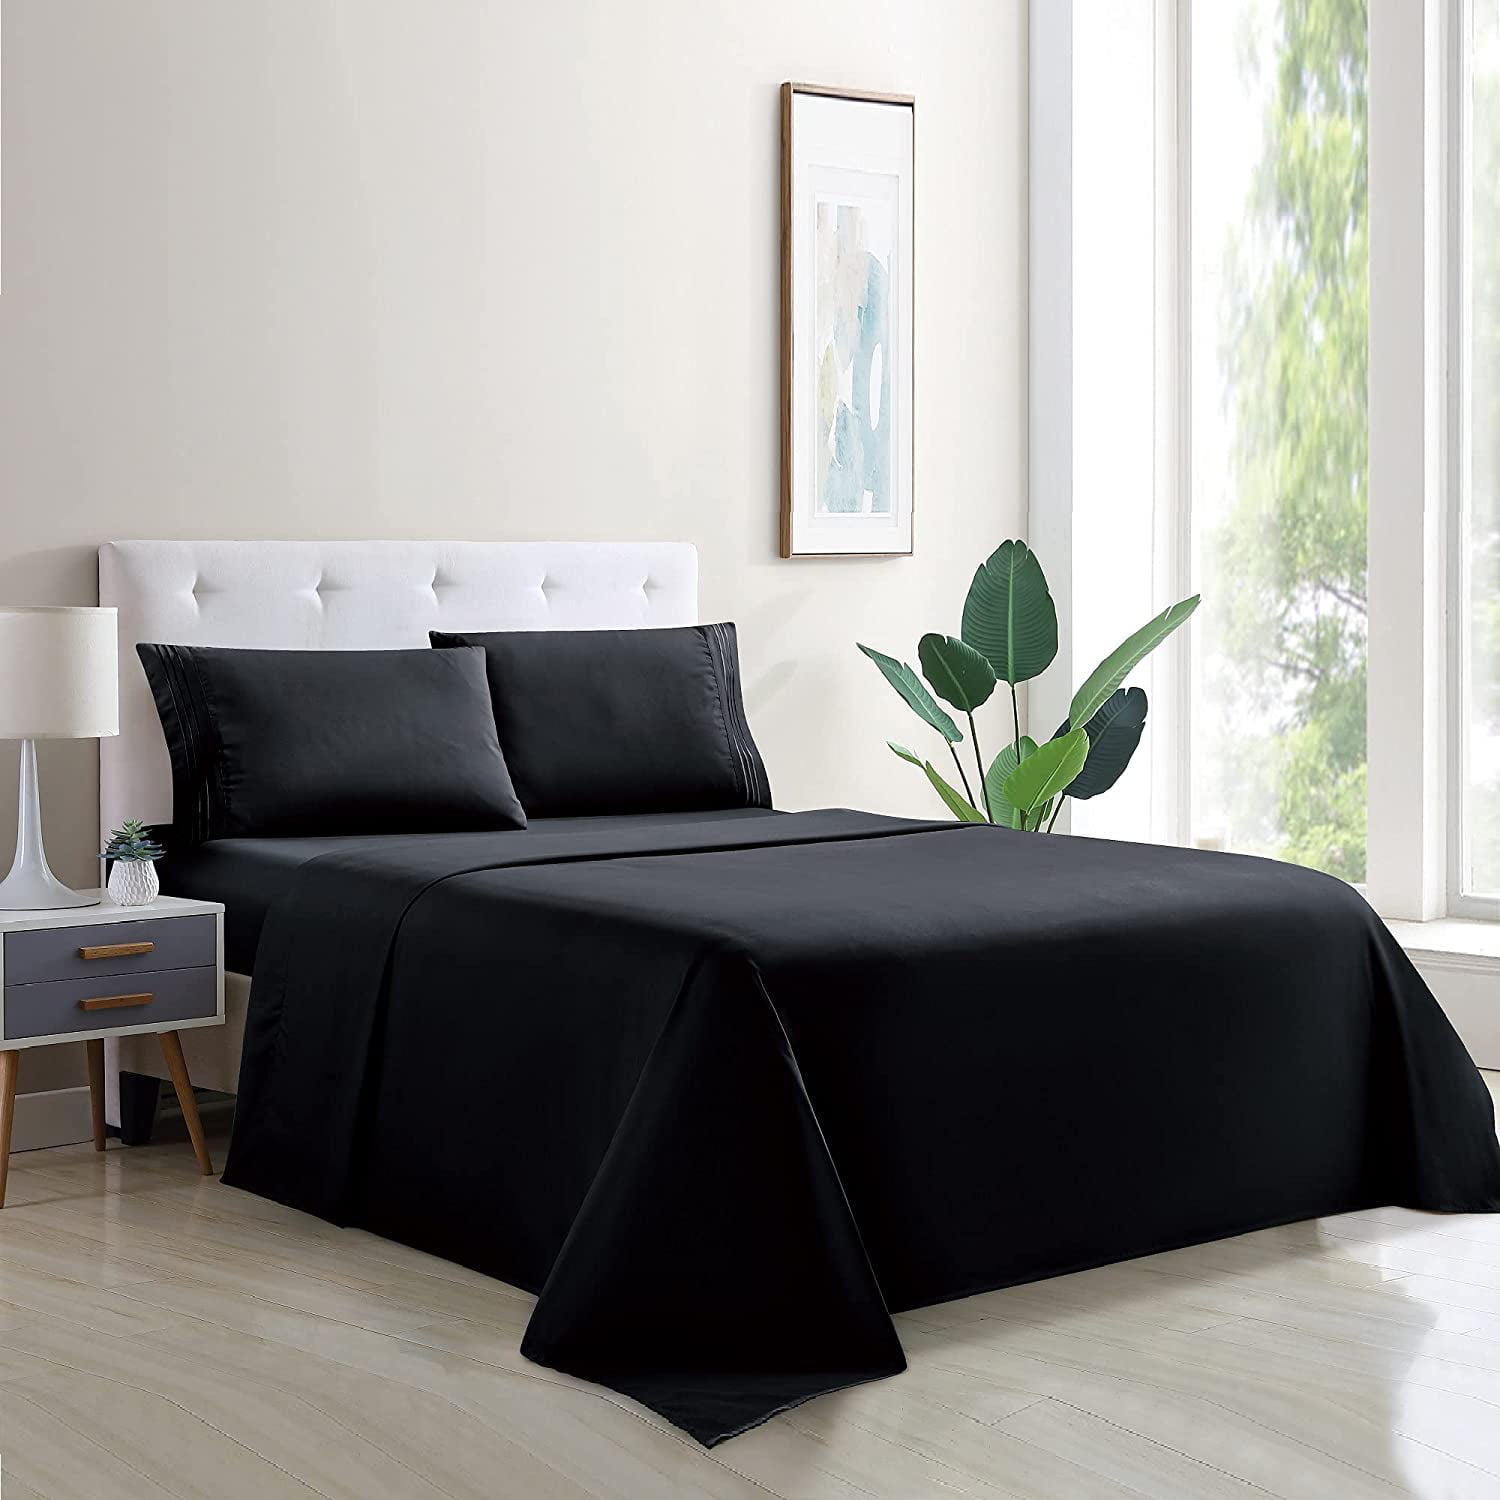 Full Double Size 4 Pcs Bed Sheets Set White 16 inches Deep Pocket Fitted Sheet and Pillowcases 1800 Thread Count Bedding Sheets Wrinkle Resistant Microfiber Super Soft Breathable 